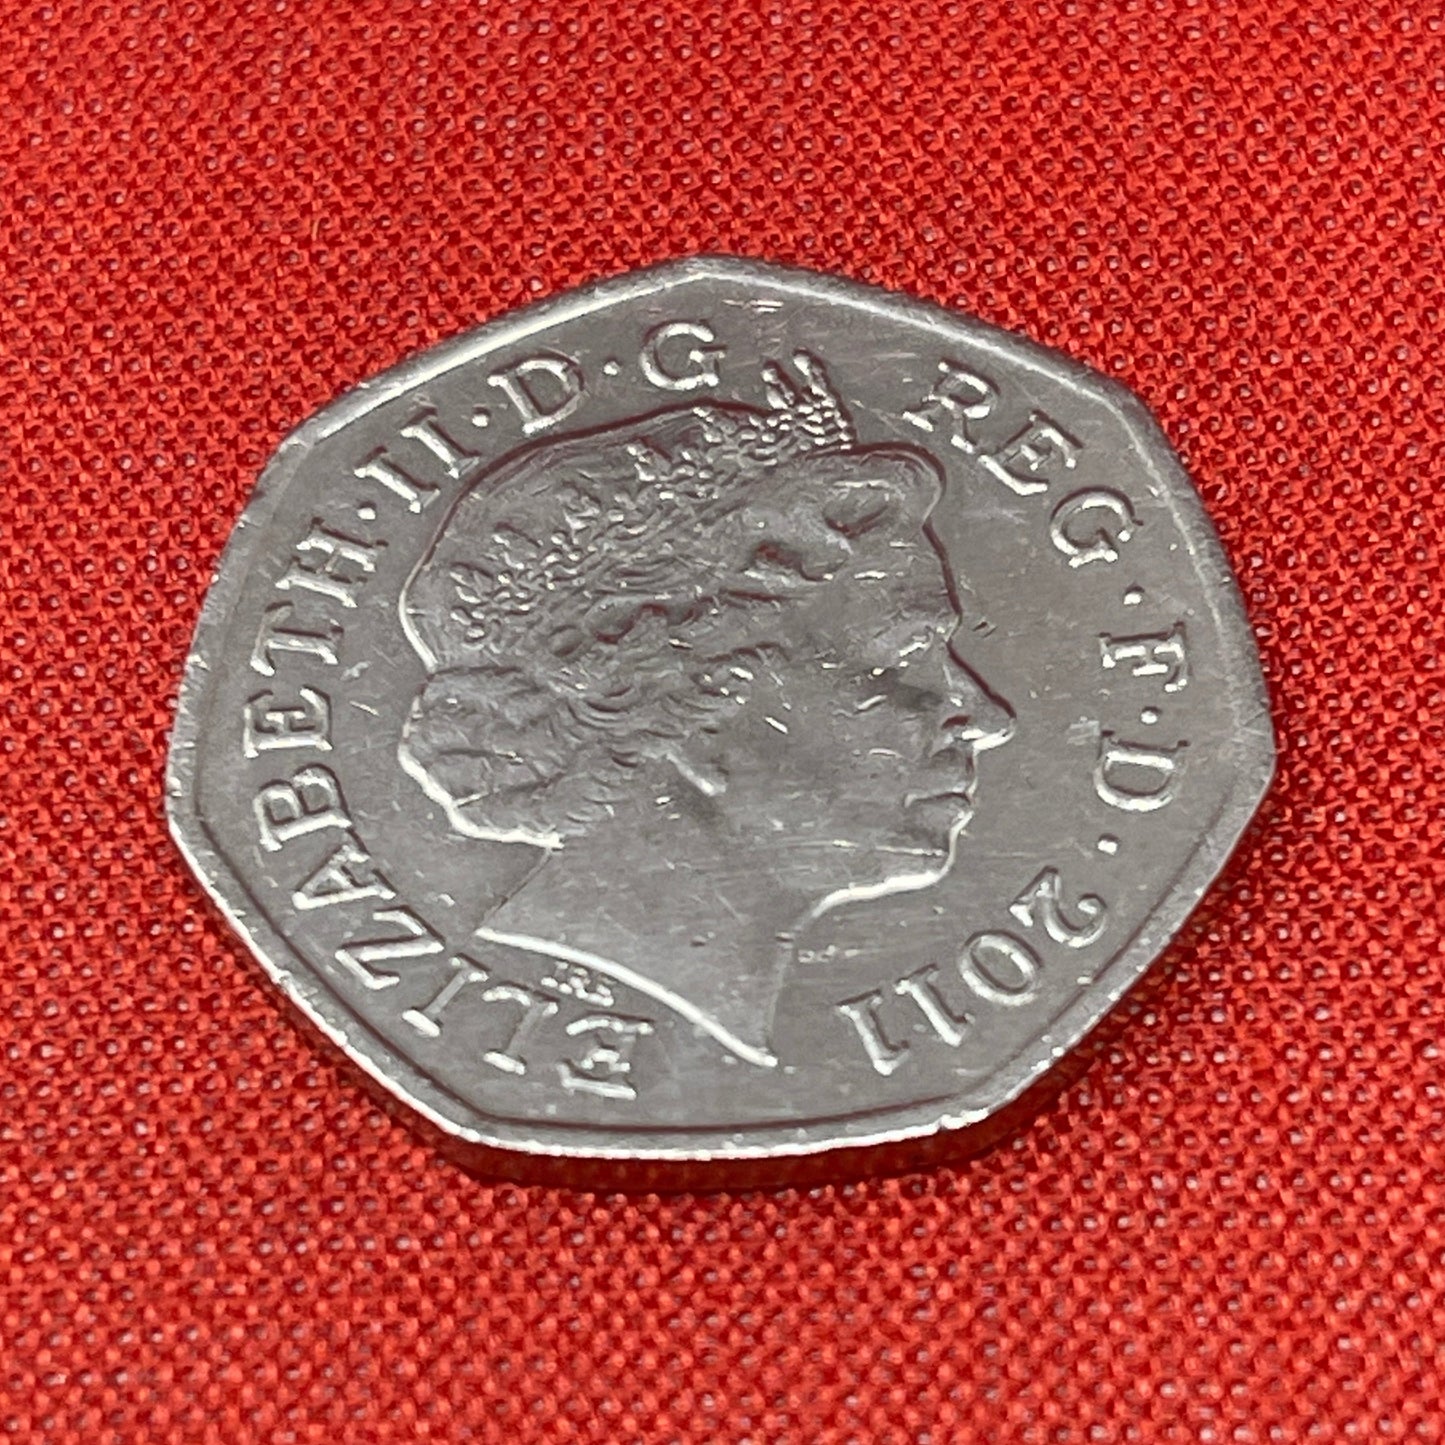 Olympics Archery 50p Fifty Pence Coin - Circulated